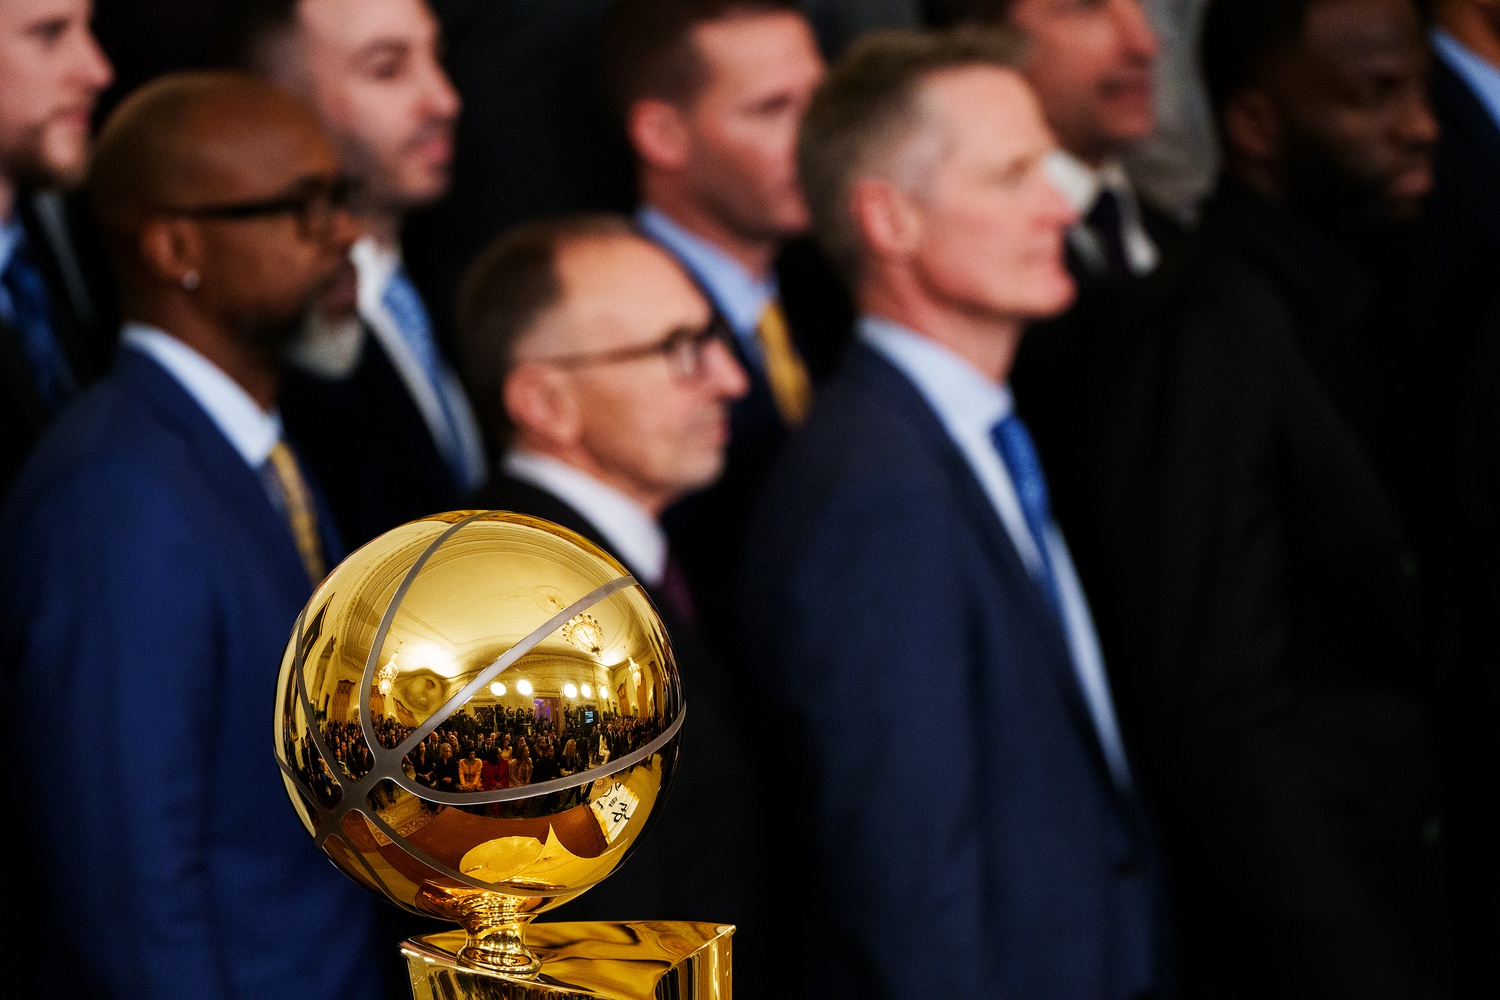 Jan 17, 2023; Washington, DC, USA; Players and staff of the Golden State Warriors stand behind the 2022 NBA championship trophy during a ceremony in the East Room at The White House. Mandatory Credit: Josh Morgan-USA TODAY